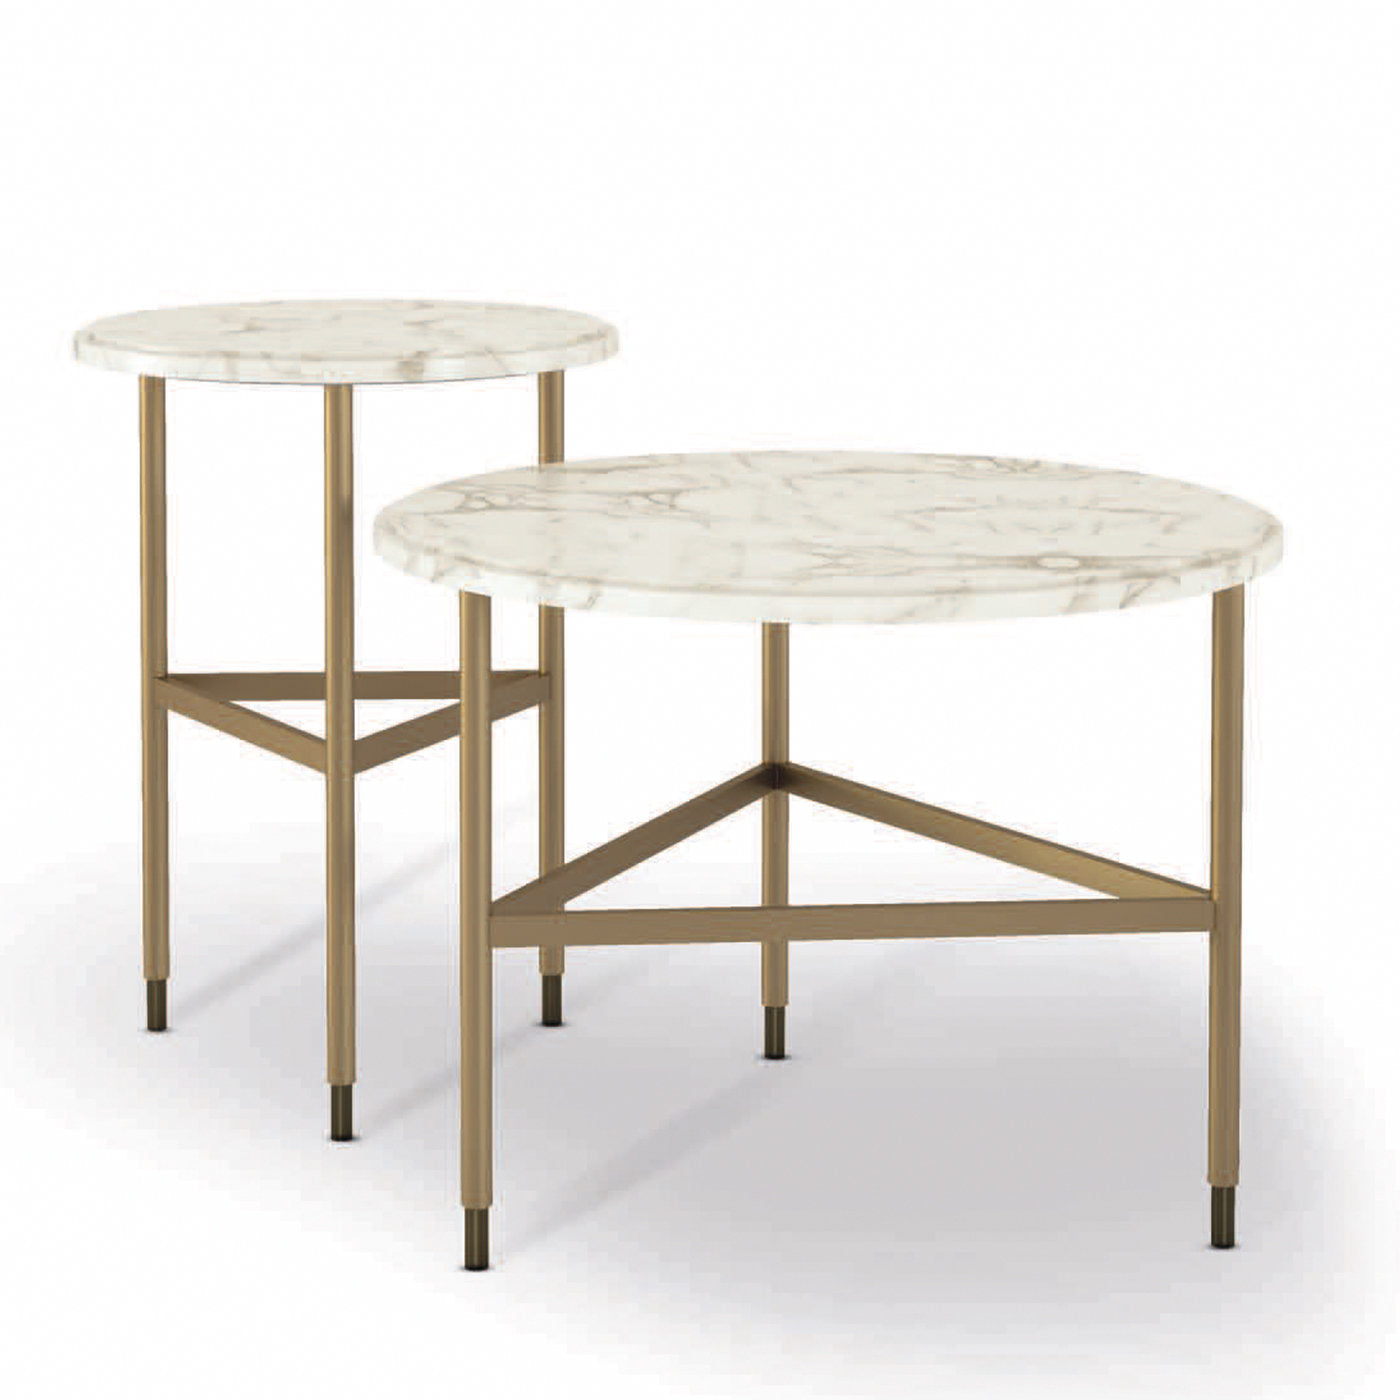 Set of 2 Gaudì Side Tables - Alternative view 1